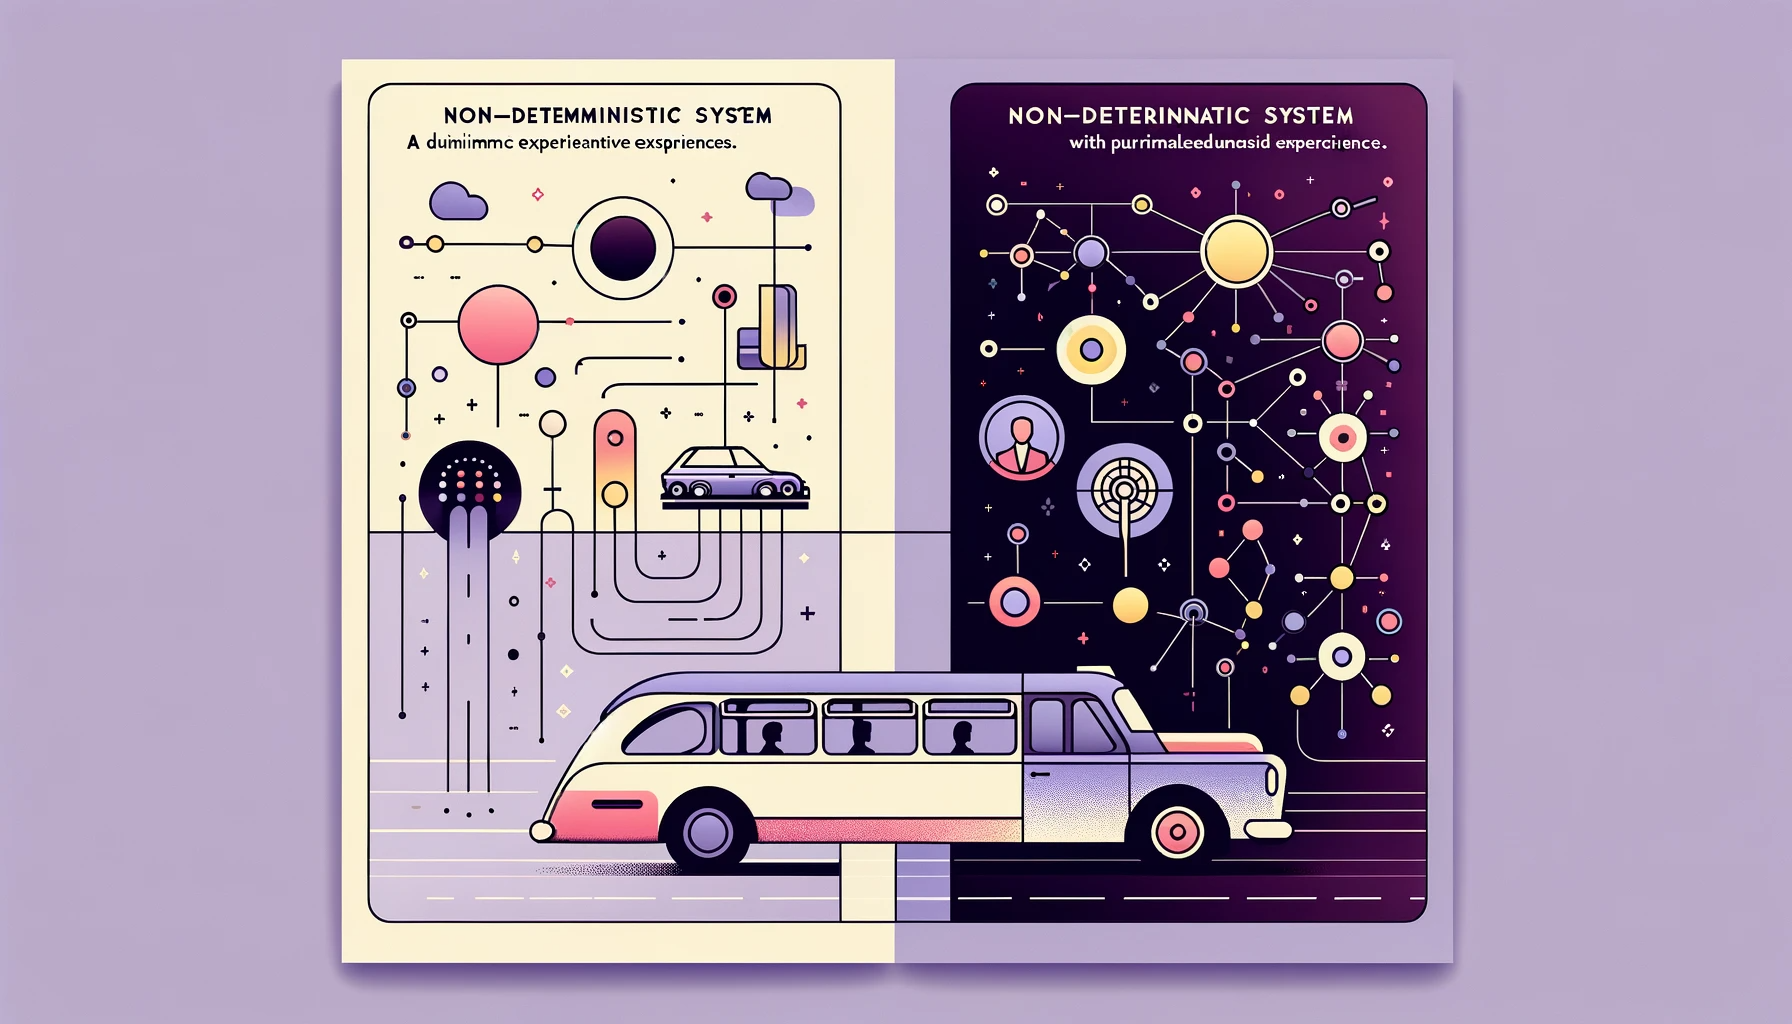 Non-Deterministic Systems Turn "Buses" Into "Taxis"